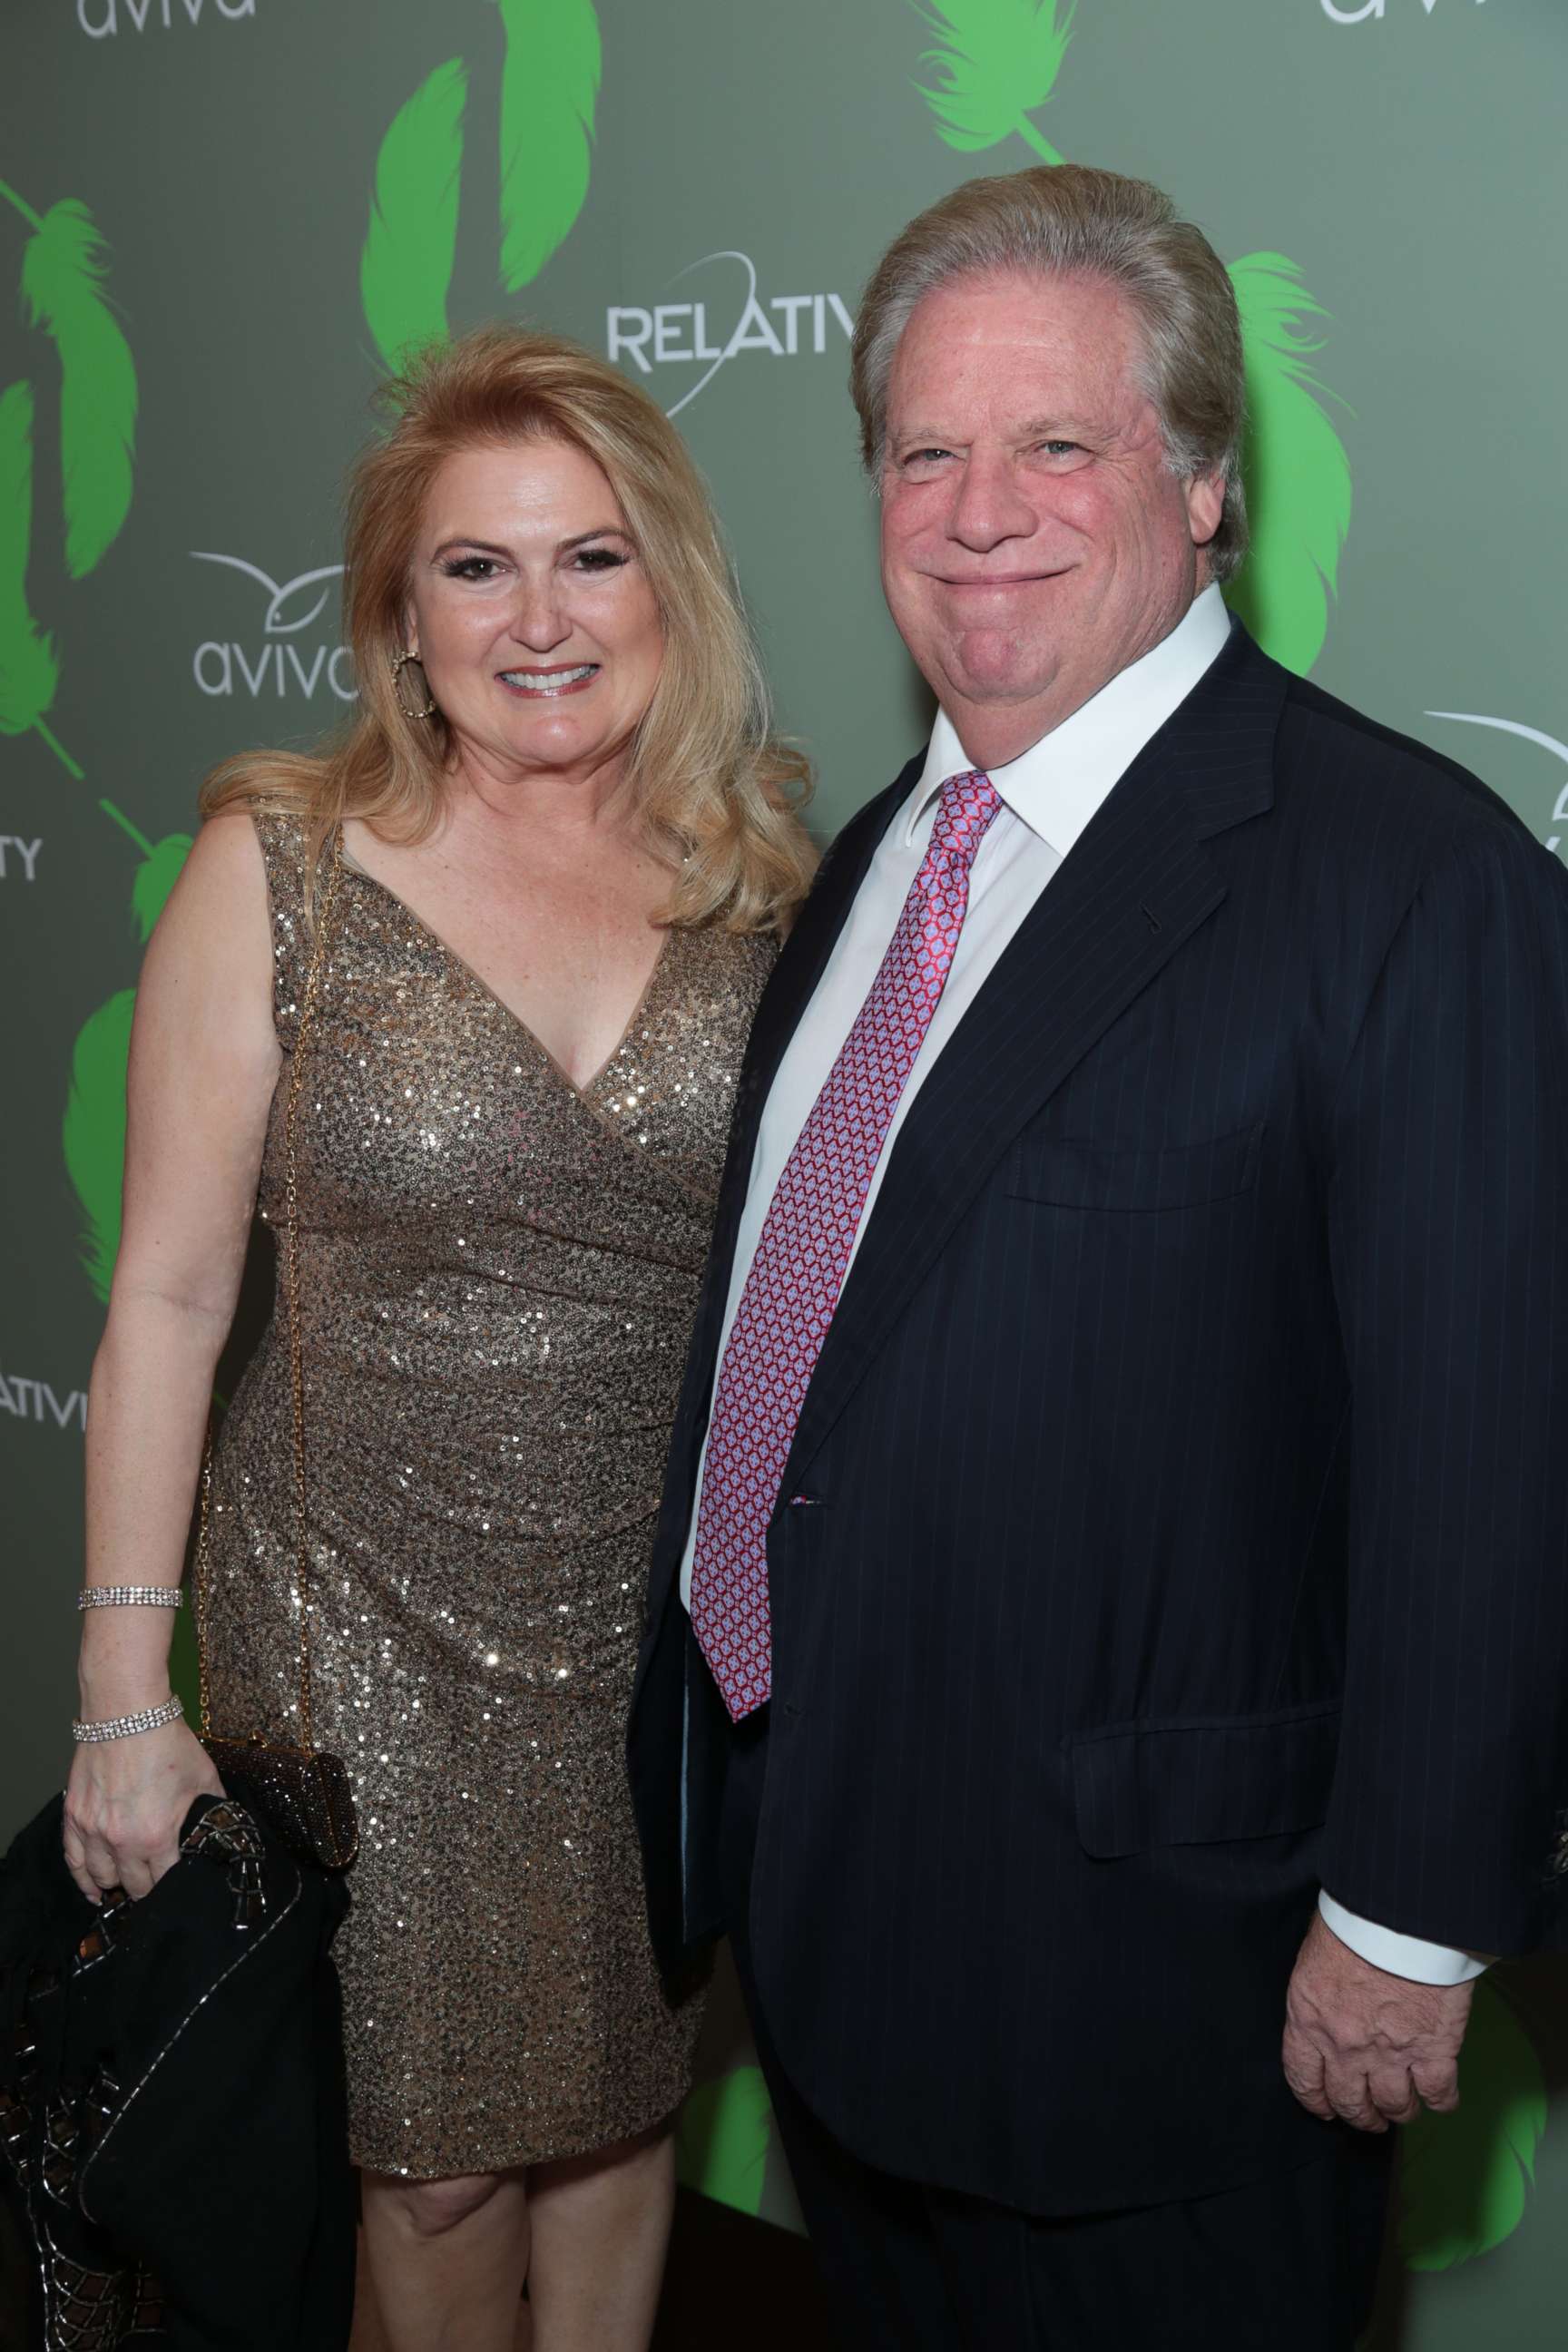 PHOTO: Robin Broidy and Elliot Broidy arrive as Aviva Family and Children's Services celebrates their 100th anniversary in Los Angeles on May 9, 2015.